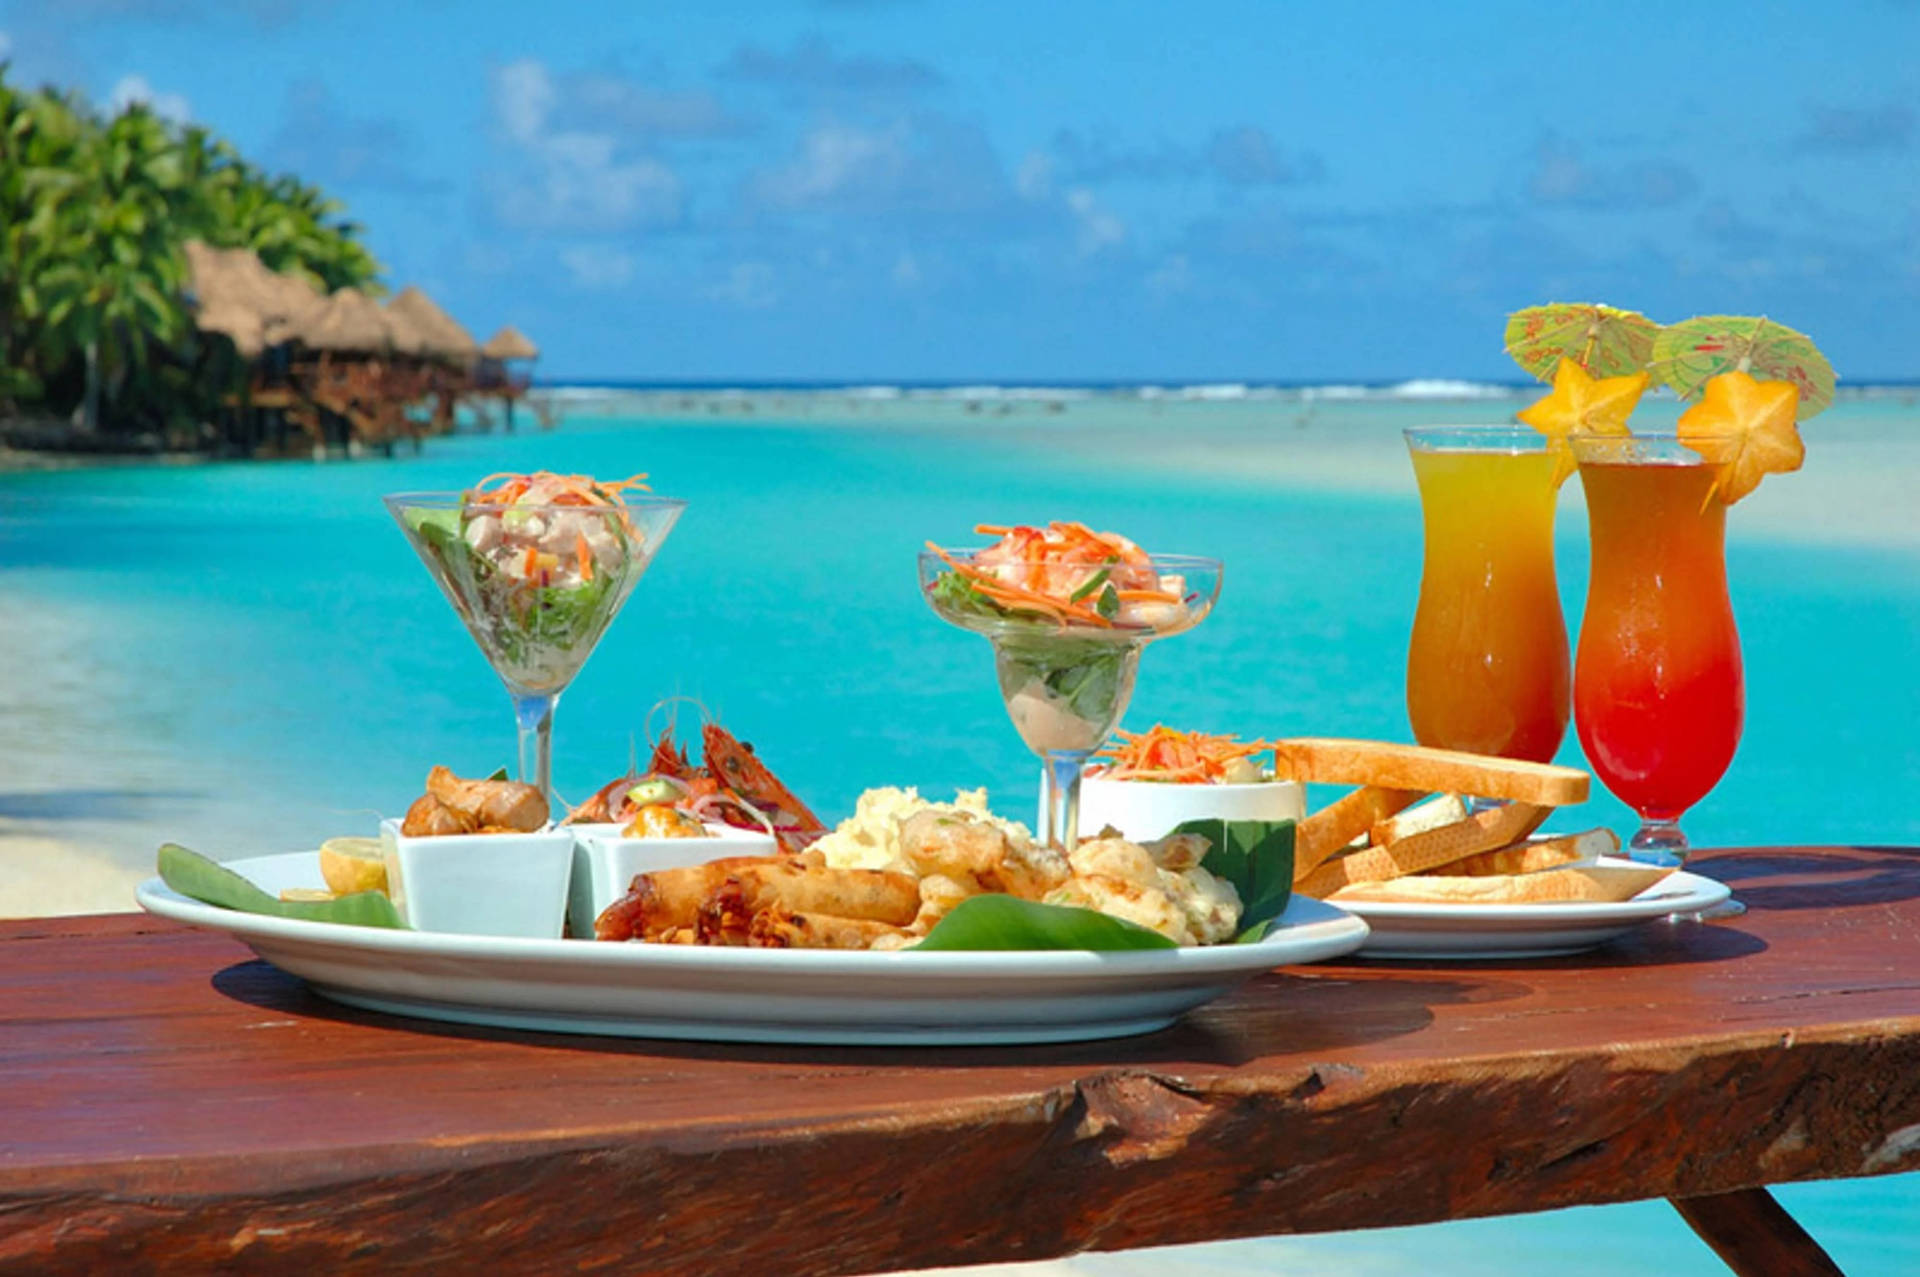 Refreshing Tropical Lunch With Fruity Drinks Background